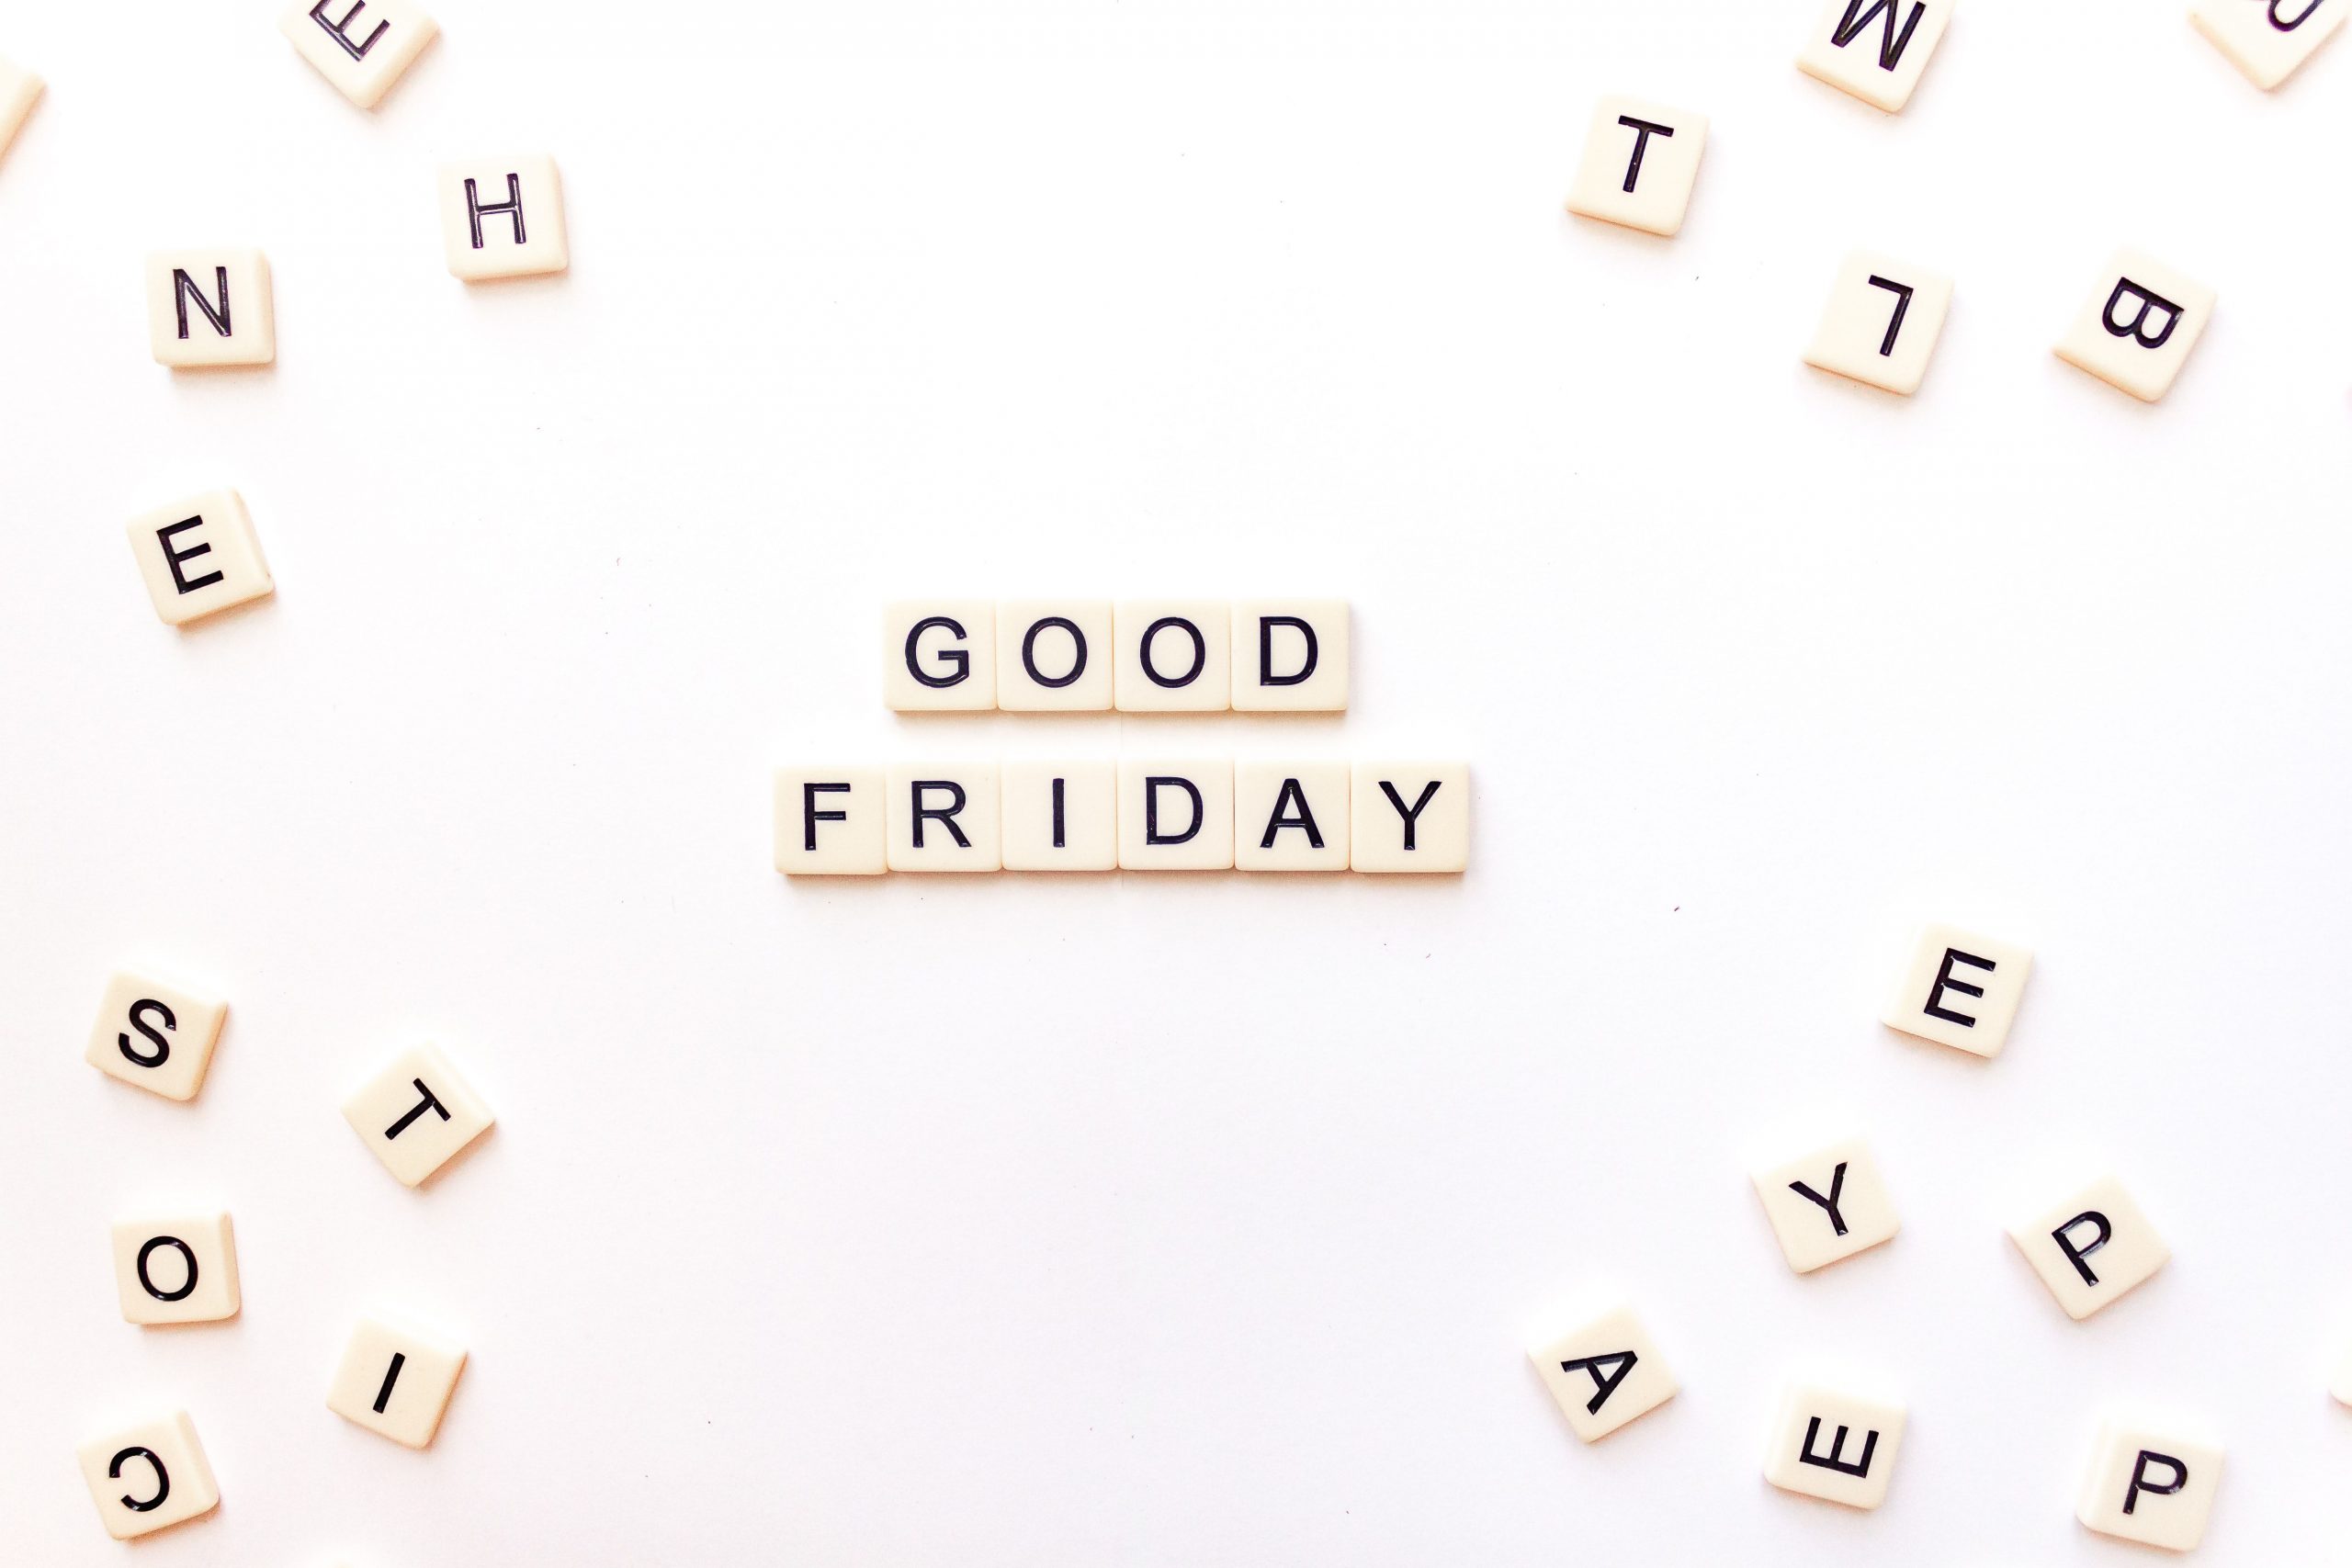 Why Good Friday is called good? Read here